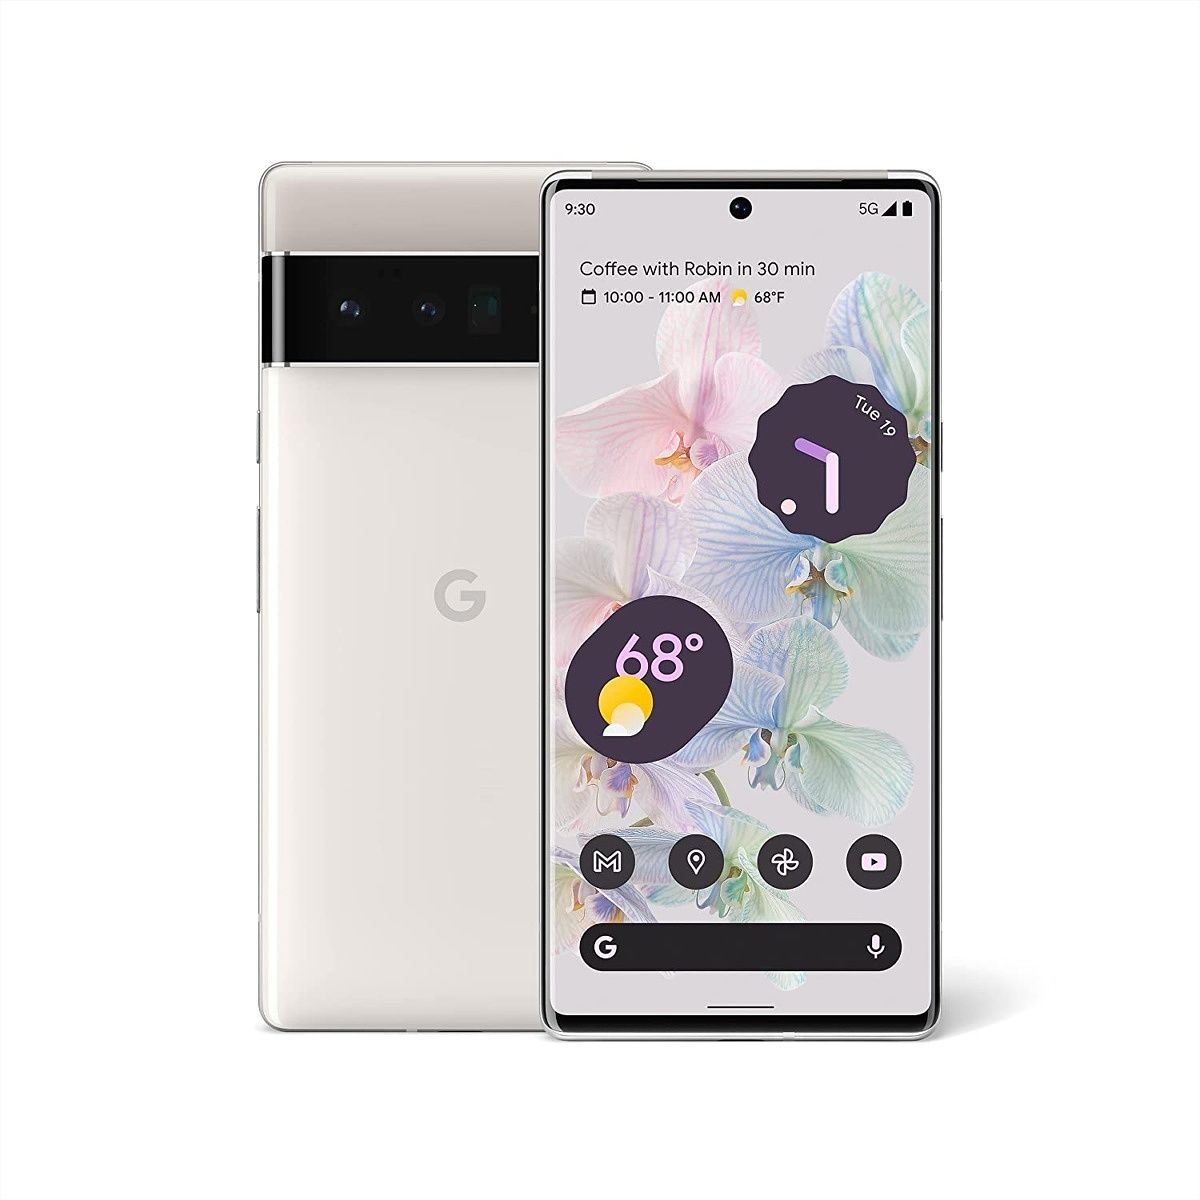 The Google Pixel 6 Pro is the latest and greatest flagship smartphone from Google, and it has a lot to love. It's not perfect, but it's the best Google phone yet for sure.